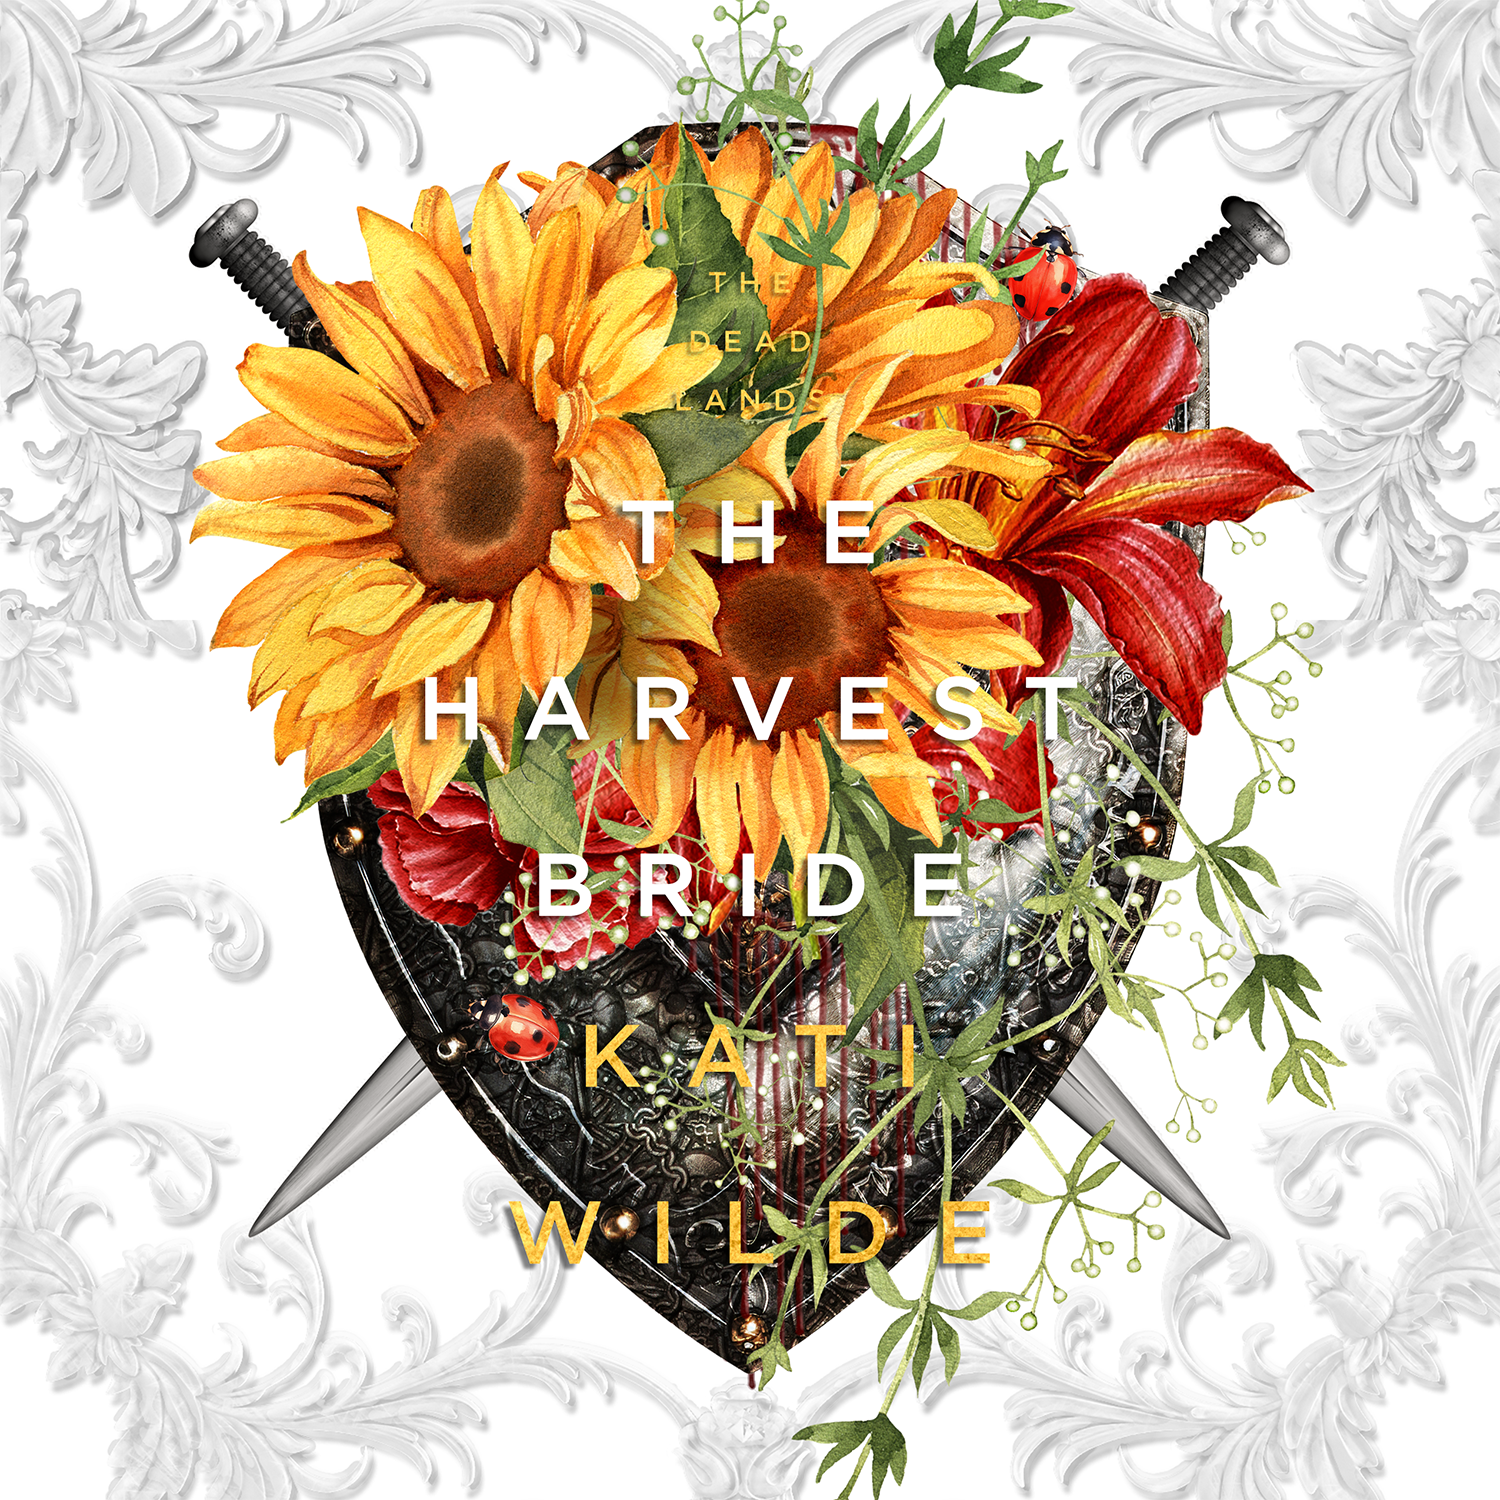 The audiobook for The Harvest Bride